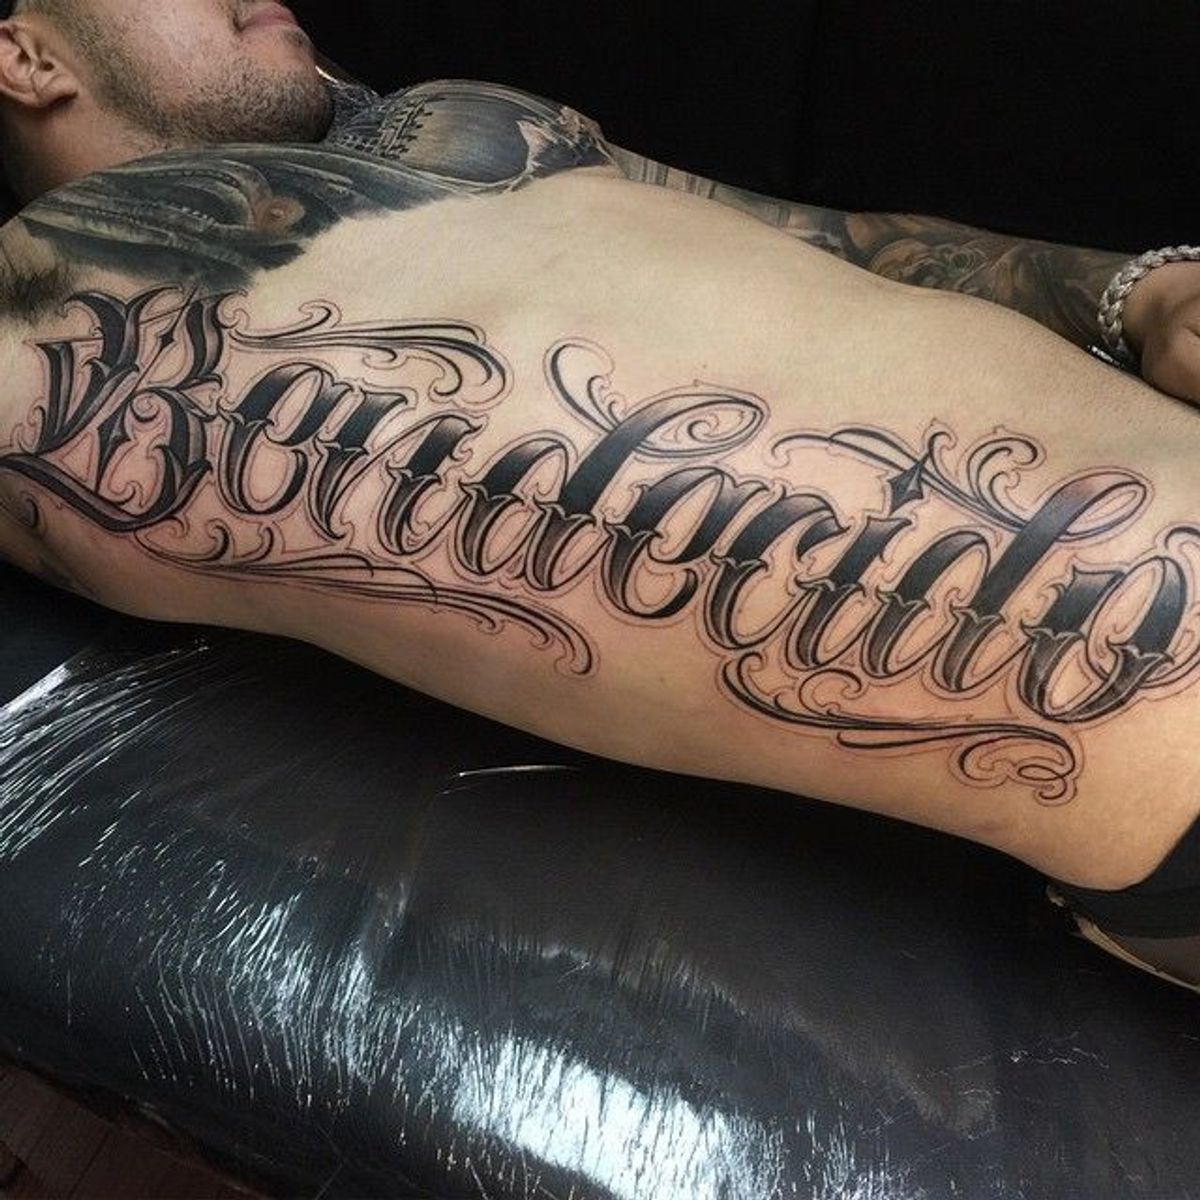 Tattoo uploaded by minerva • Bendecido Lettering Tattoo by Orks One via ...